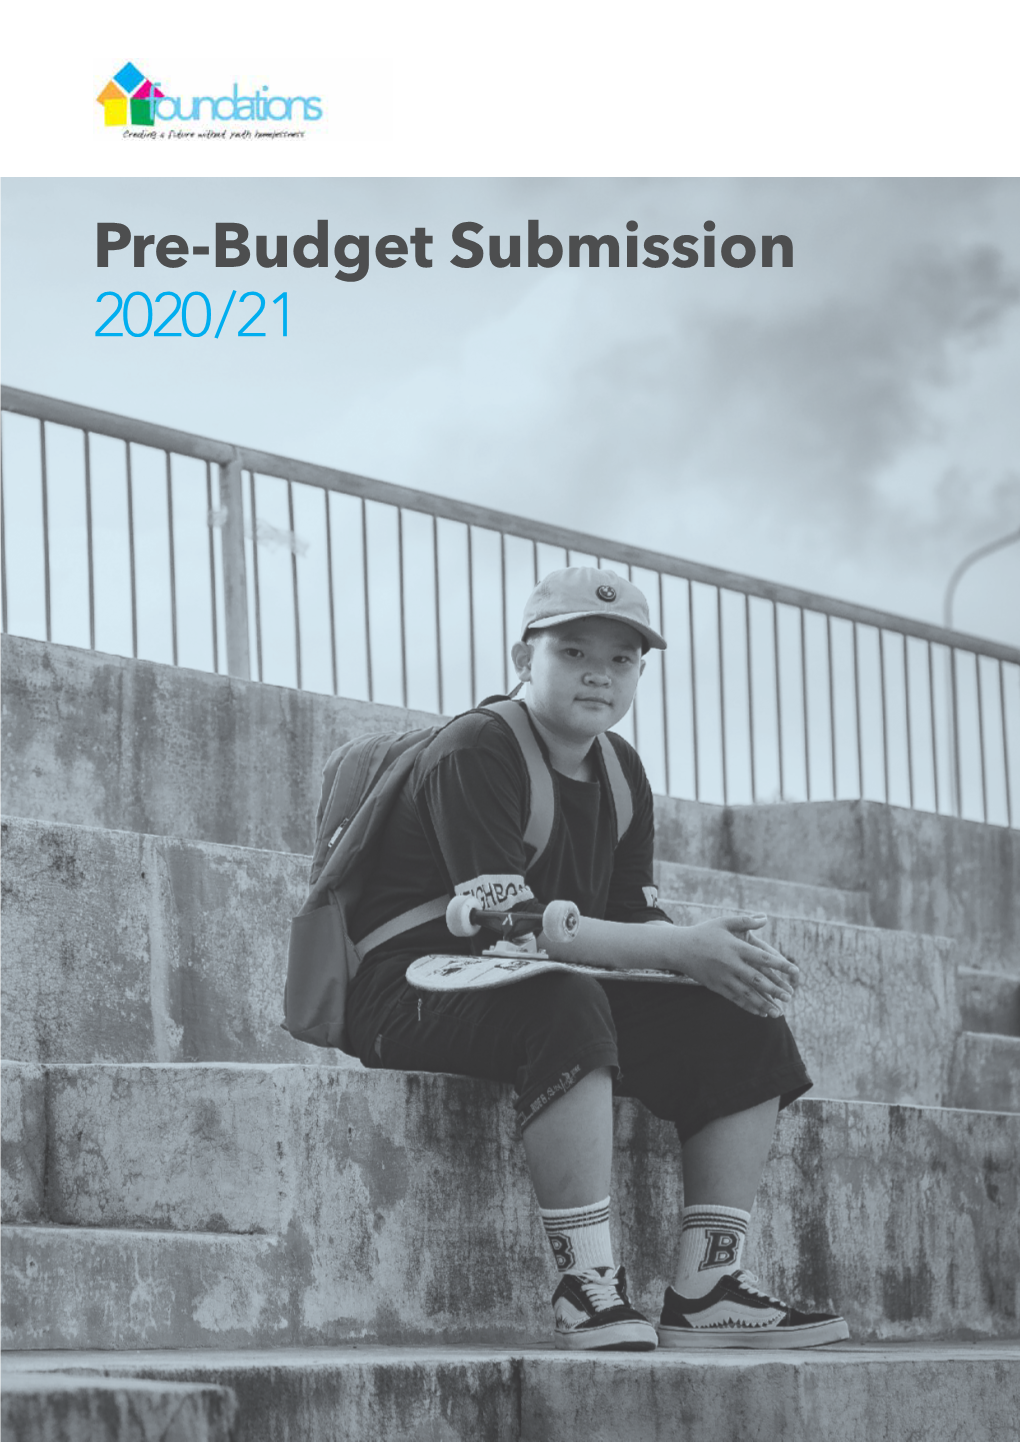 Yfoundations Pre-Budget Submission 2020-21